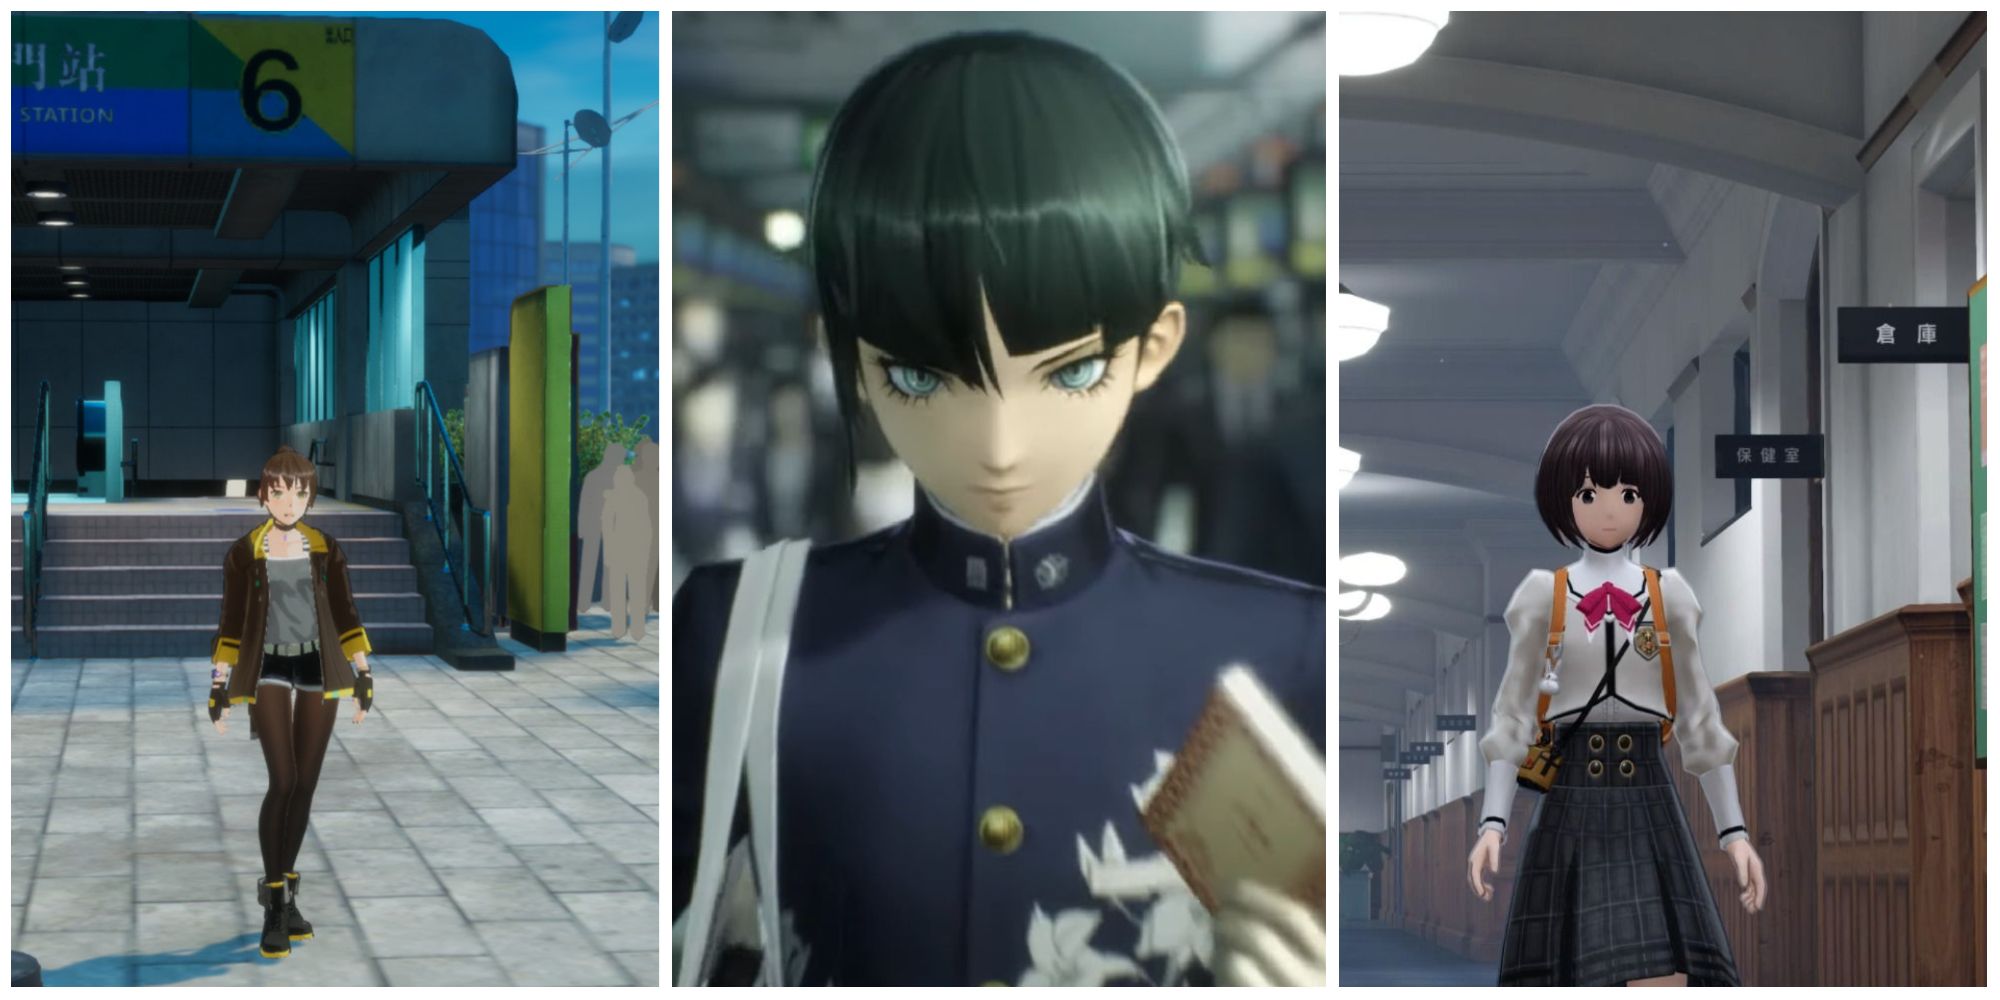 on the left is Yumo from Dusk Diver, in the middle is the protagonist of Shin Megami Tensei 5 and on the right is Chiyo from Monark